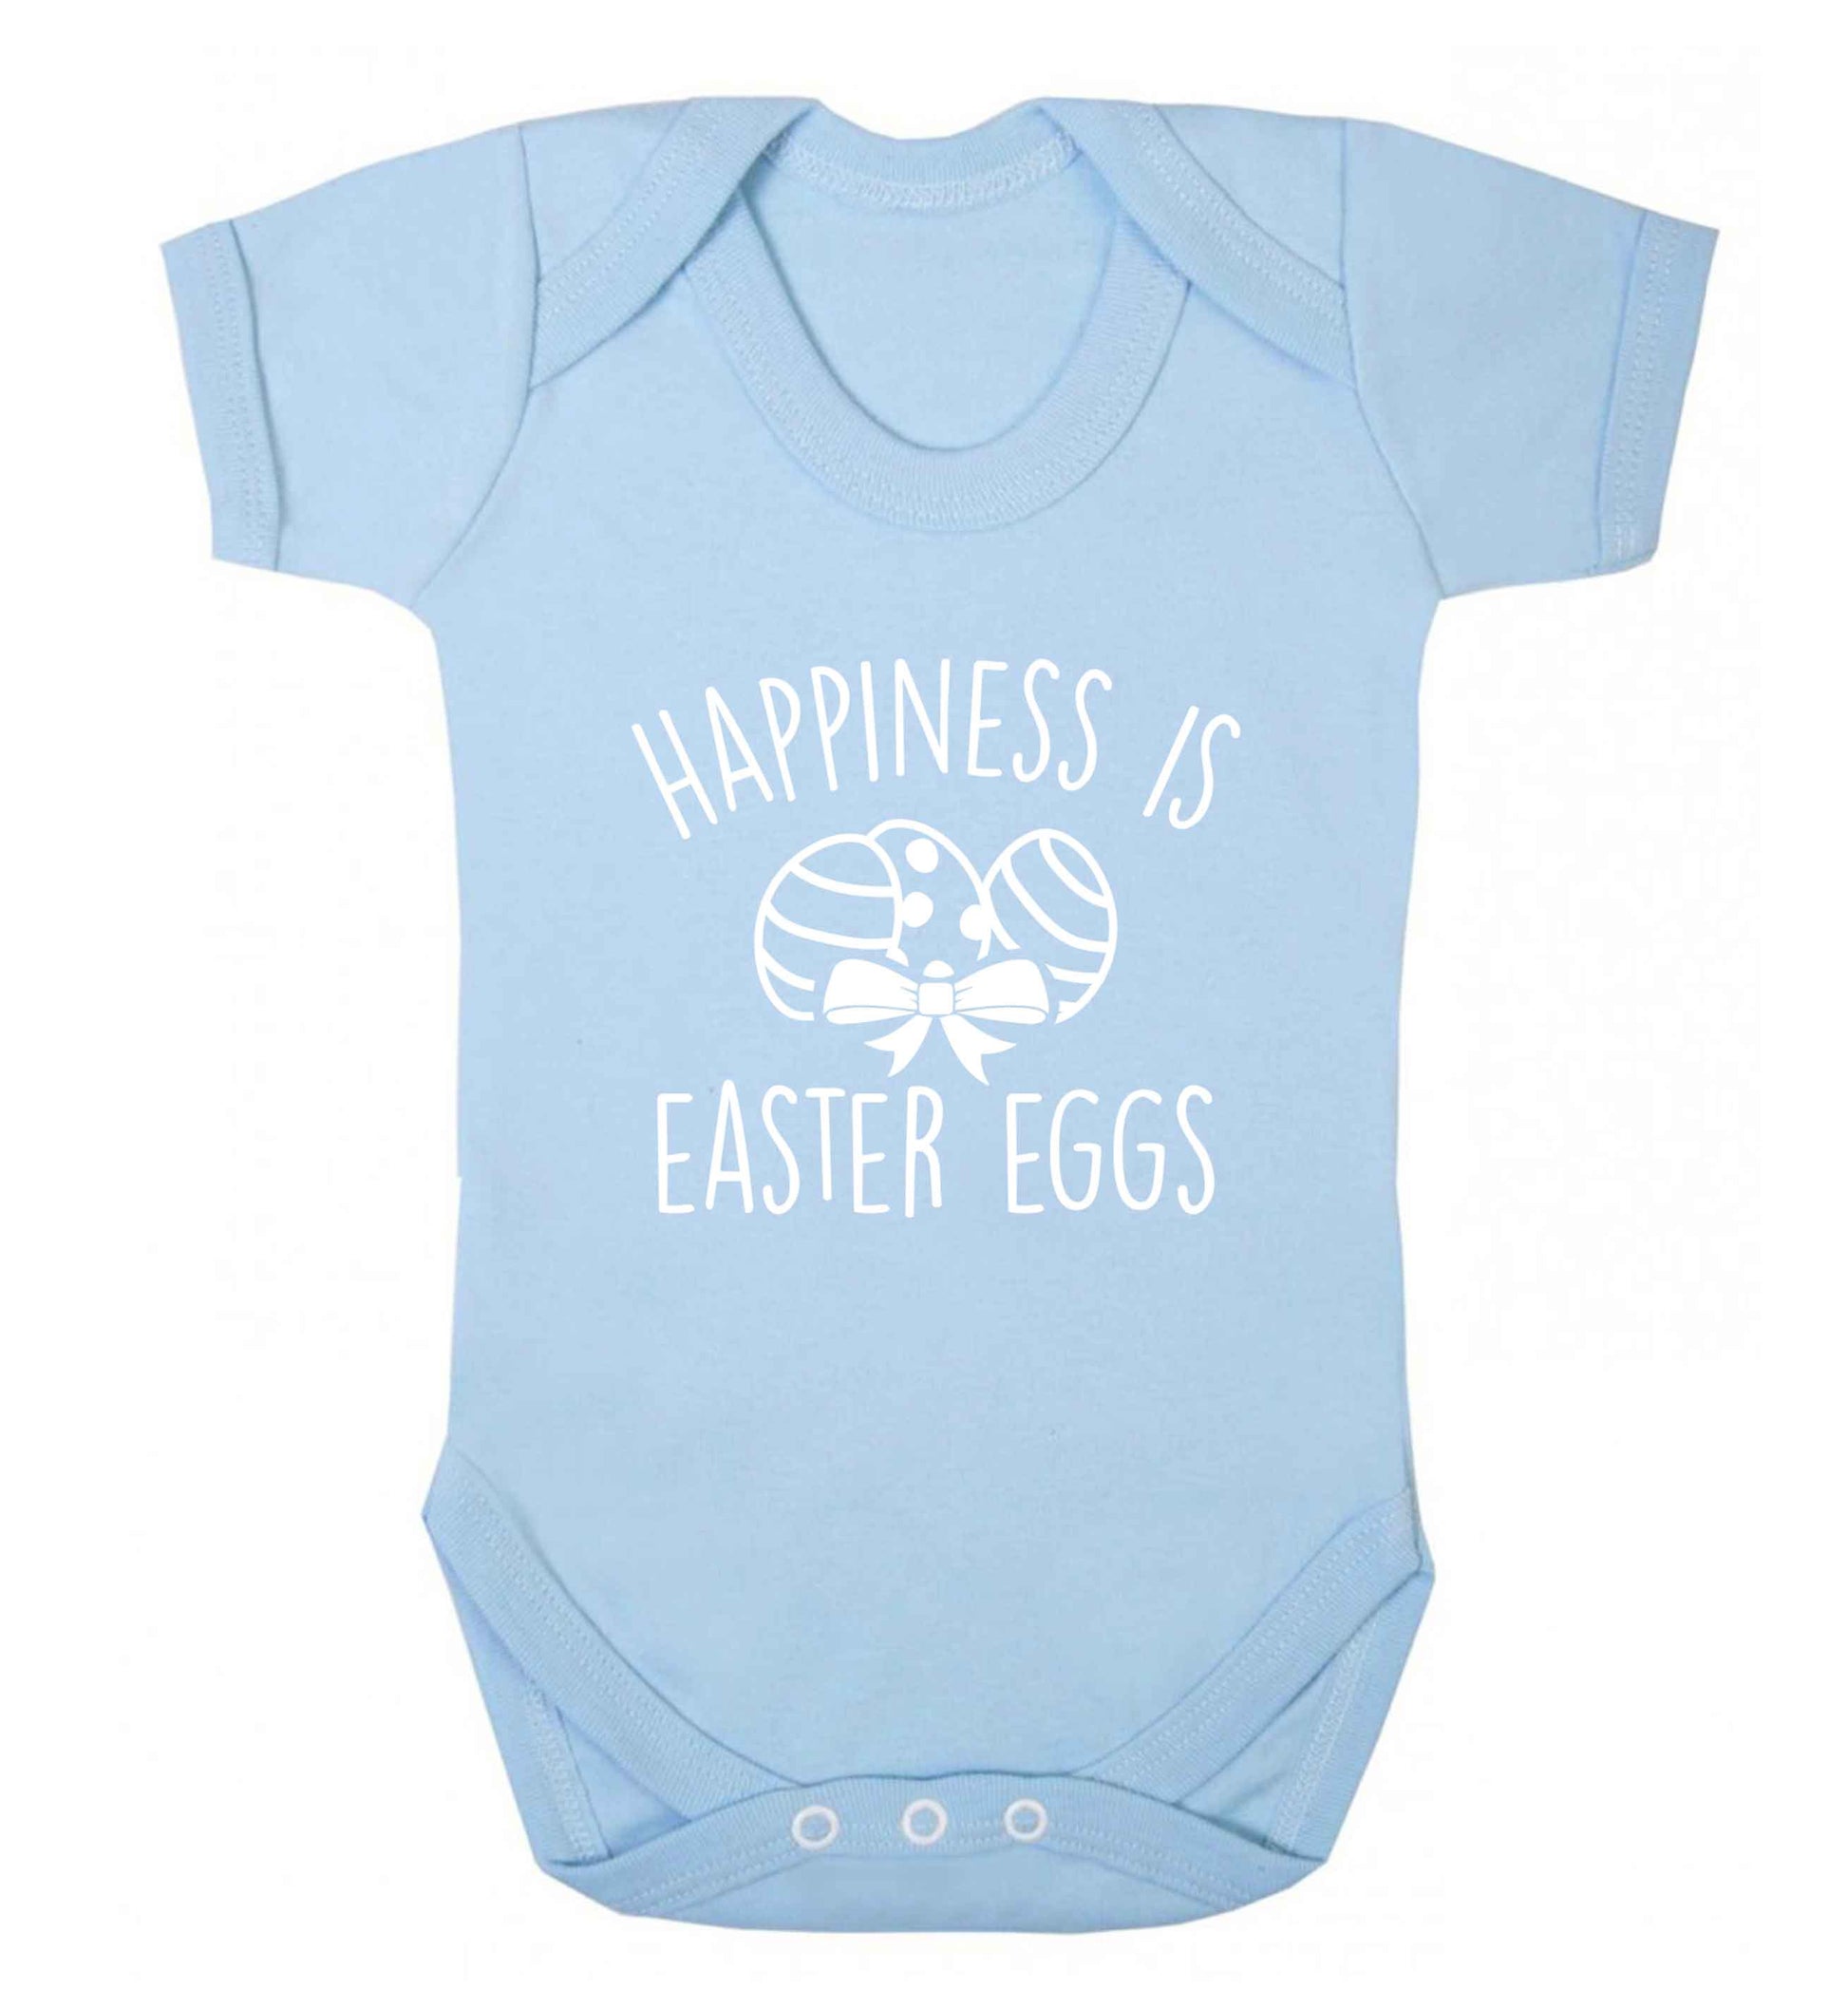 Happiness is Easter eggs baby vest pale blue 18-24 months